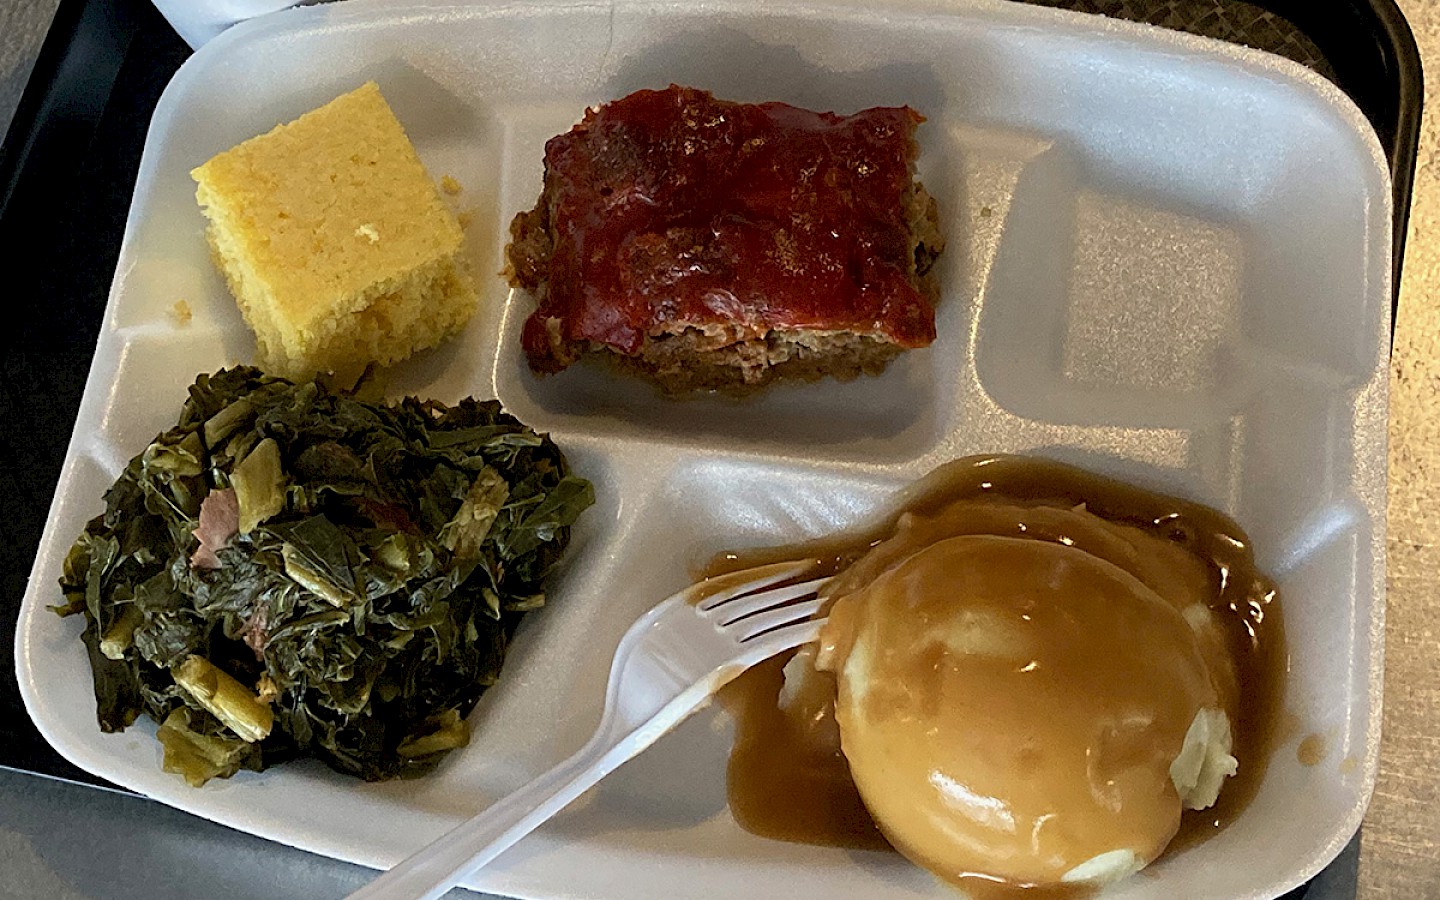 meatloaf, mashed potatoes with gravy, collard greens, and cornbread